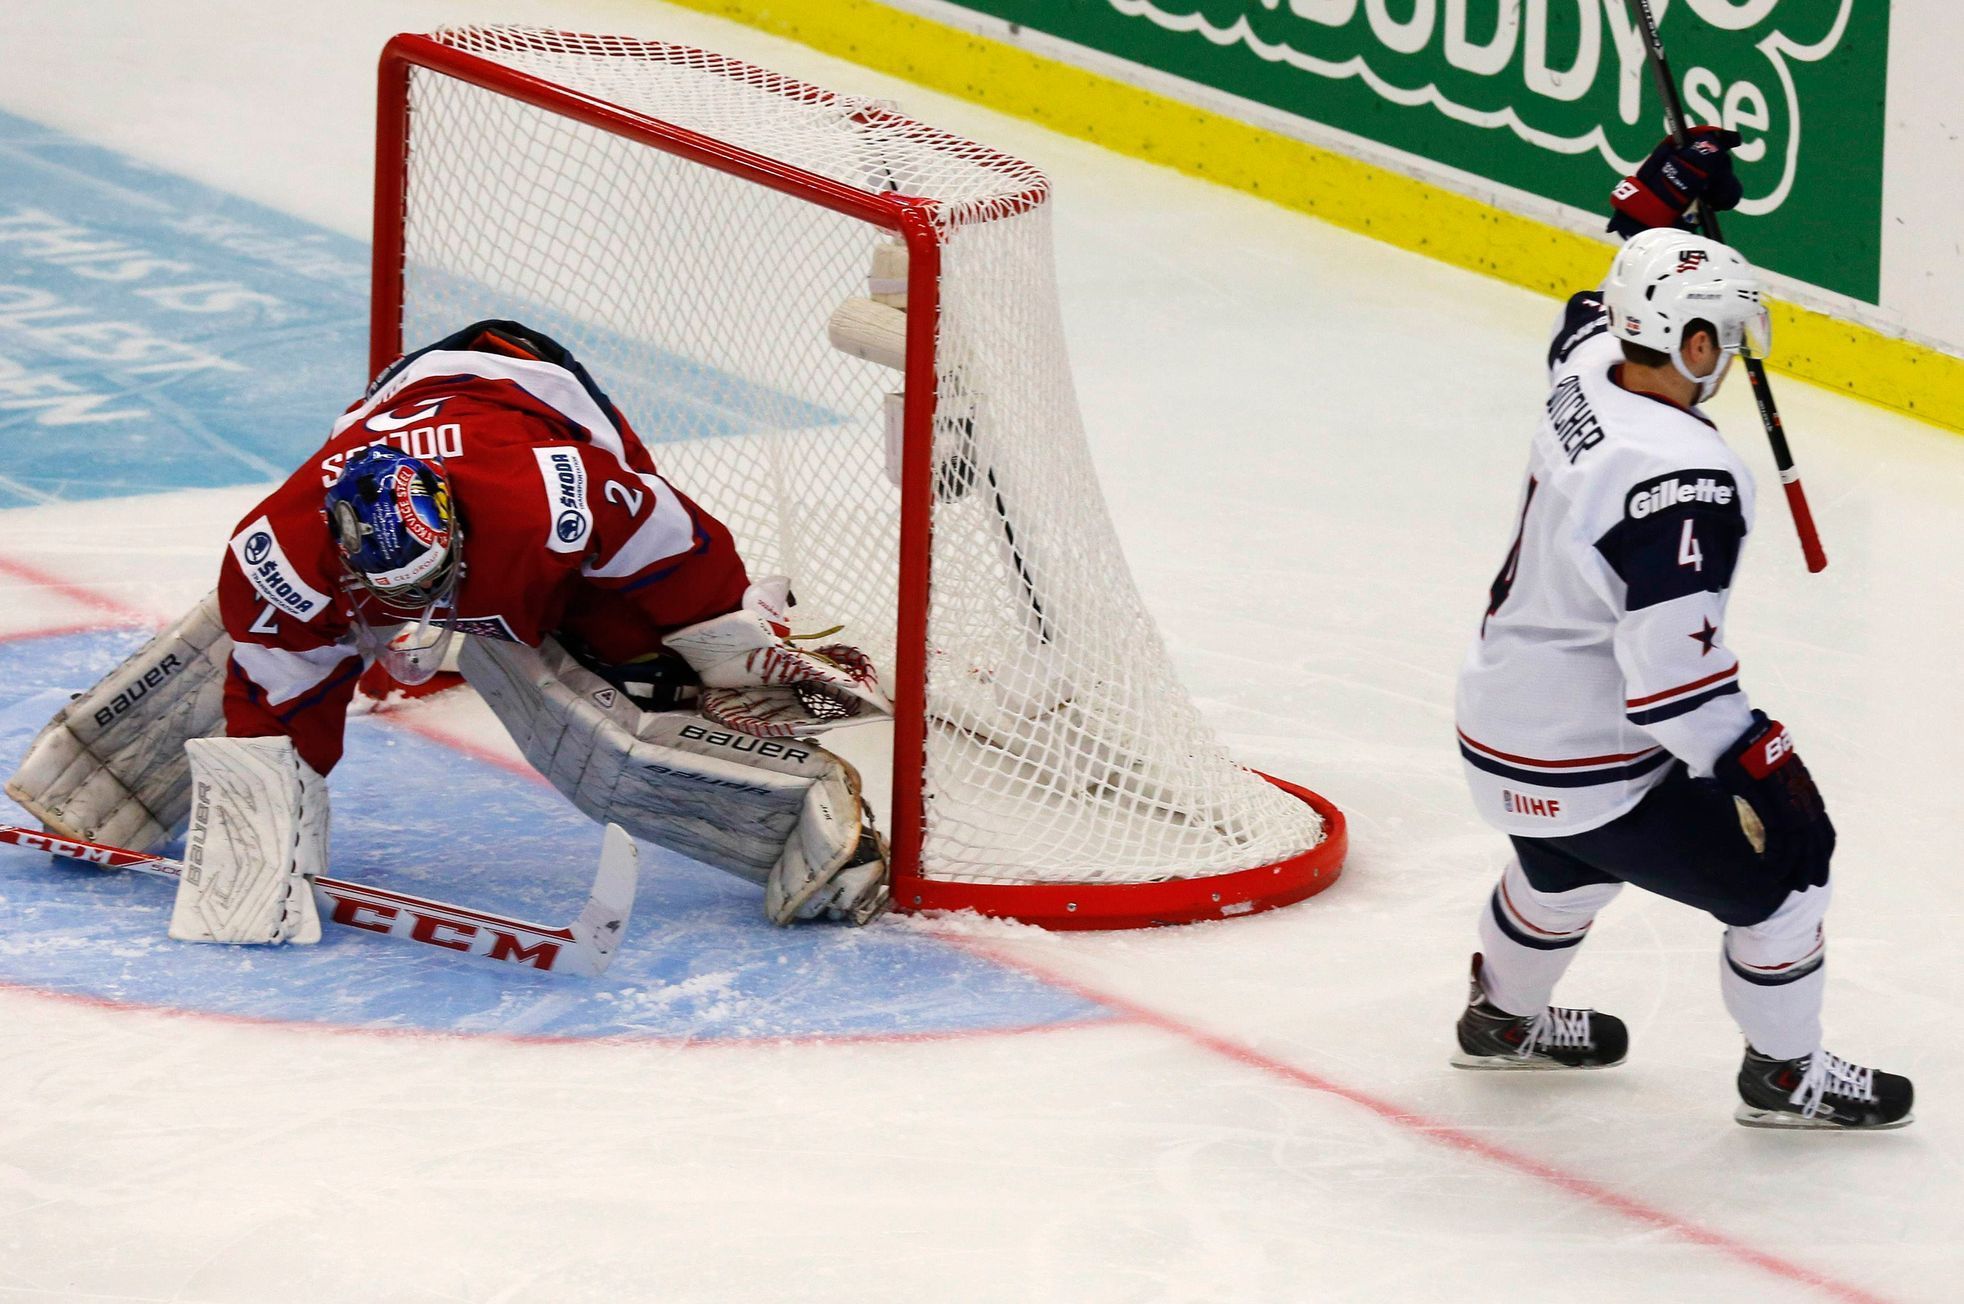 Butcher of the U.S. scores on Czech Republic's goalie Dolejs during their IIHF World Junior Championship ice hockey game in Malmo